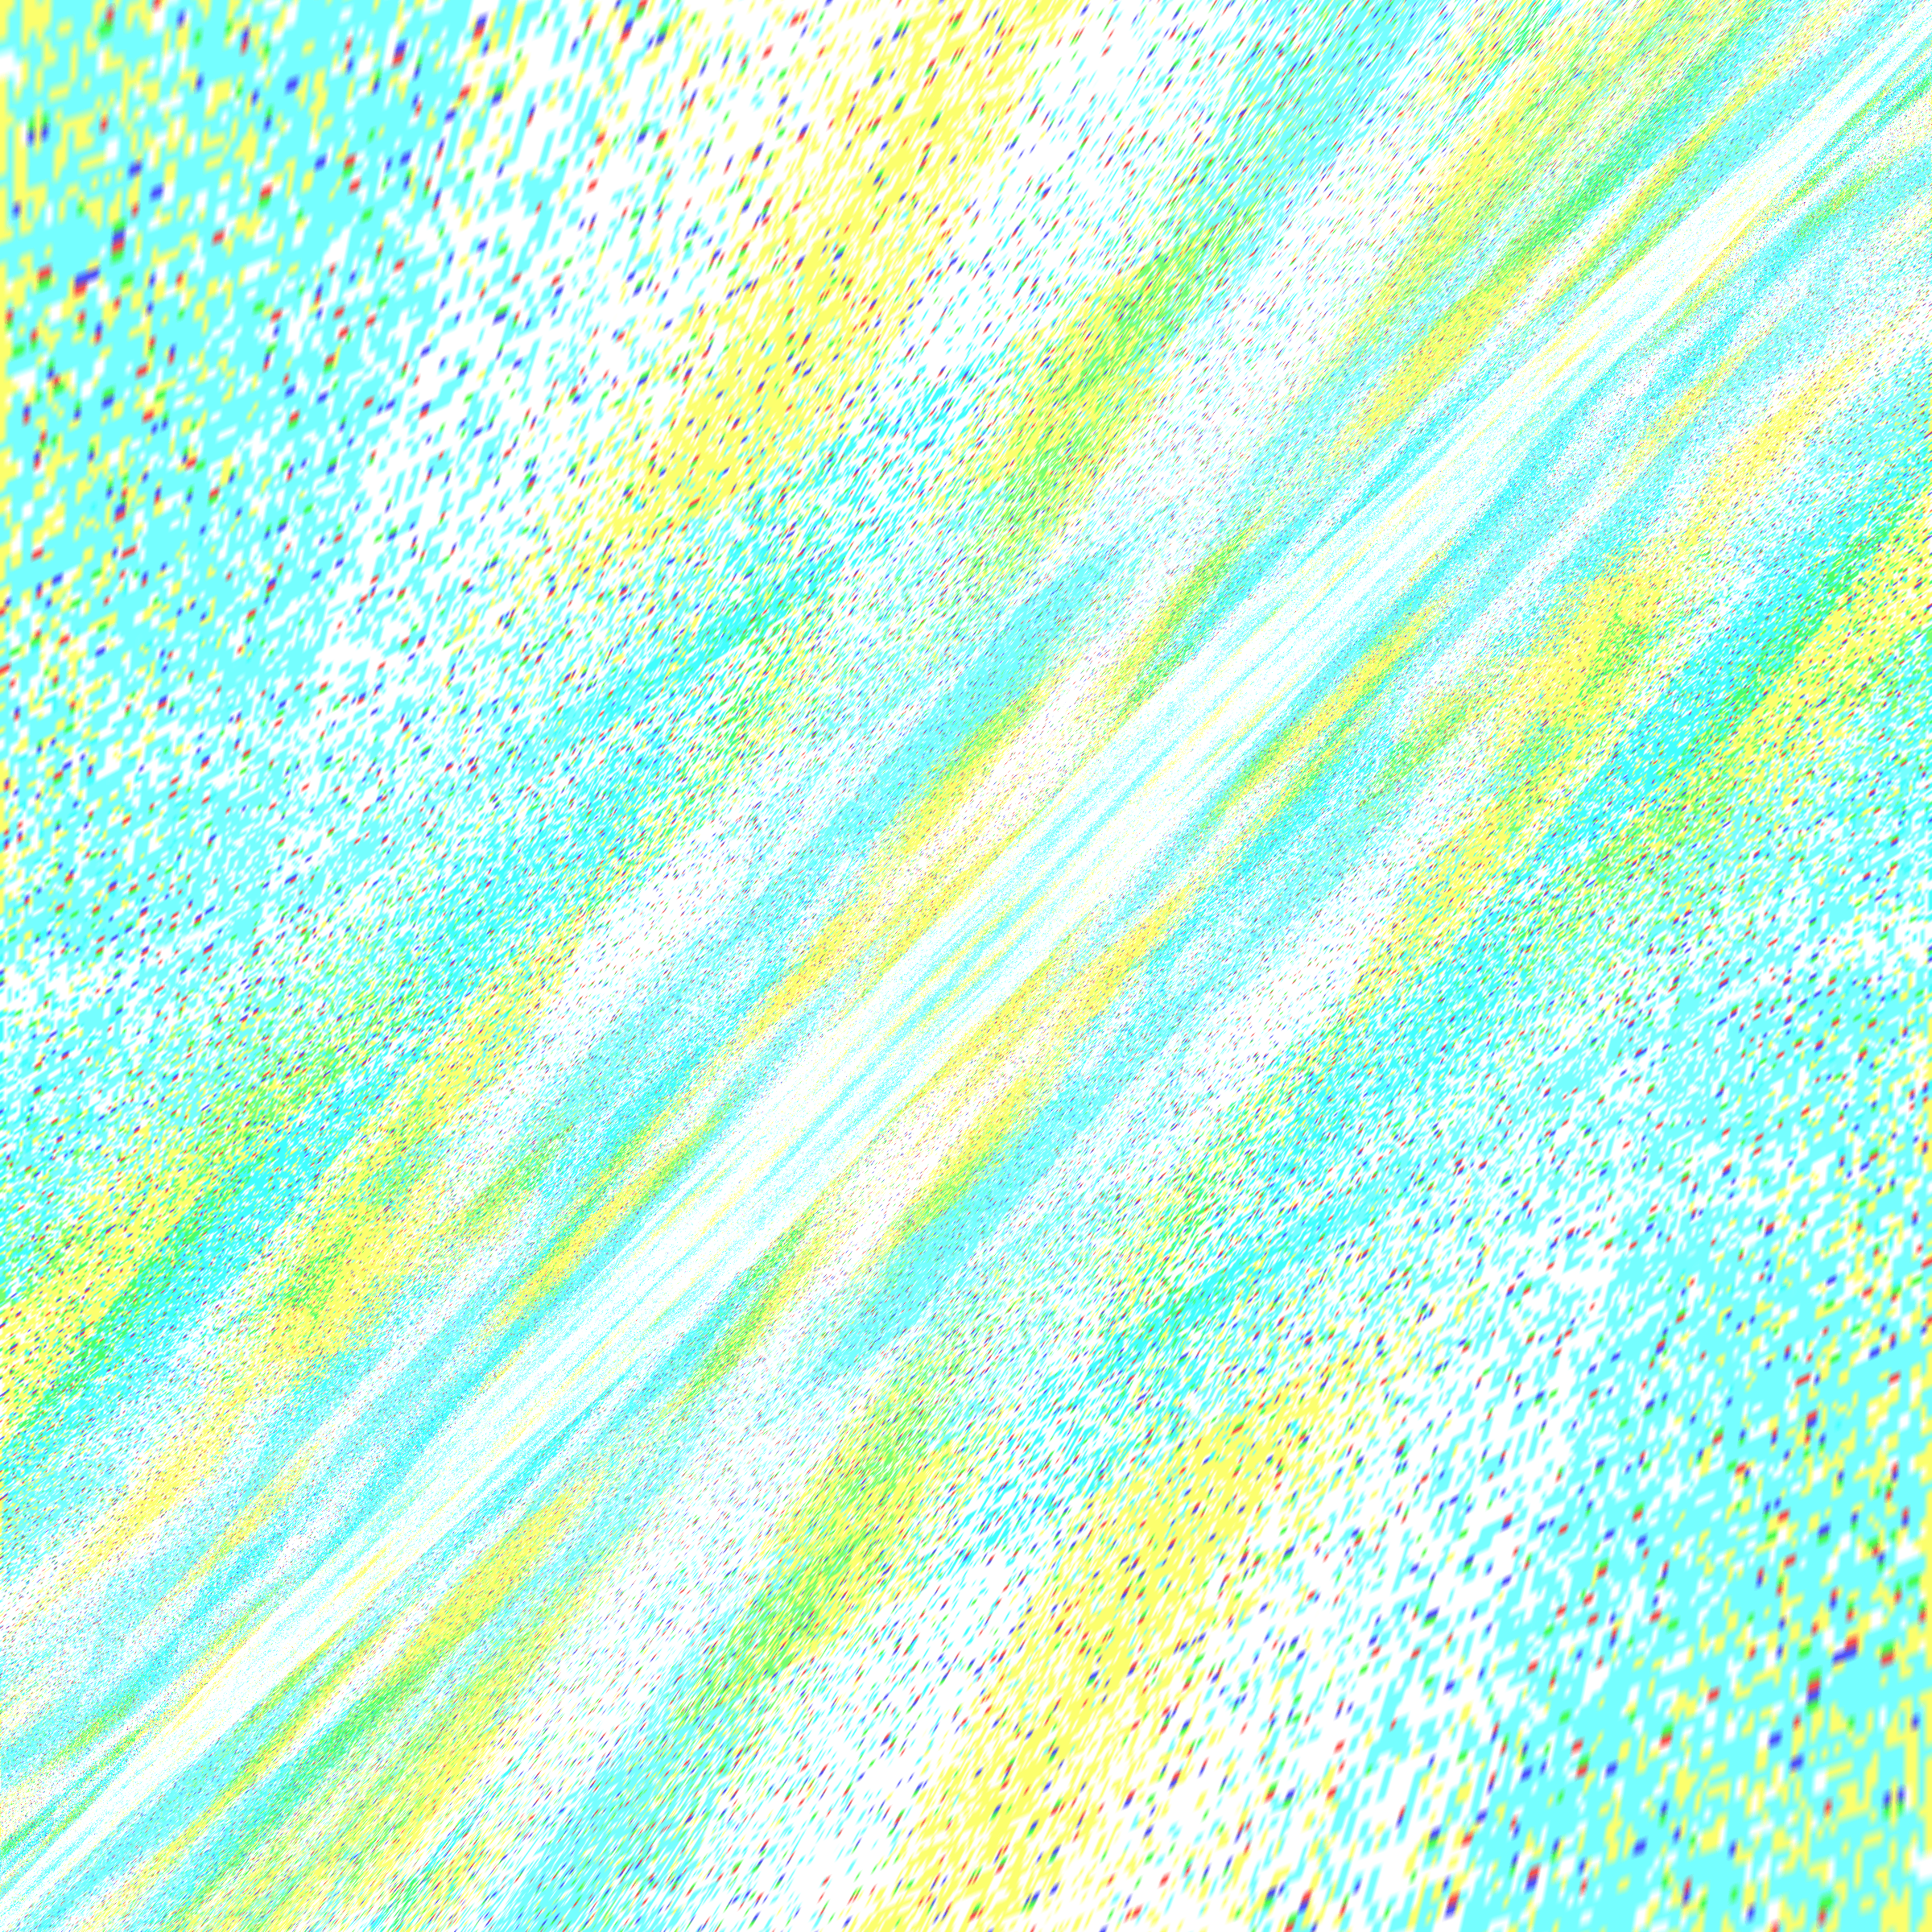 Day 149 - Speckled Oscillations